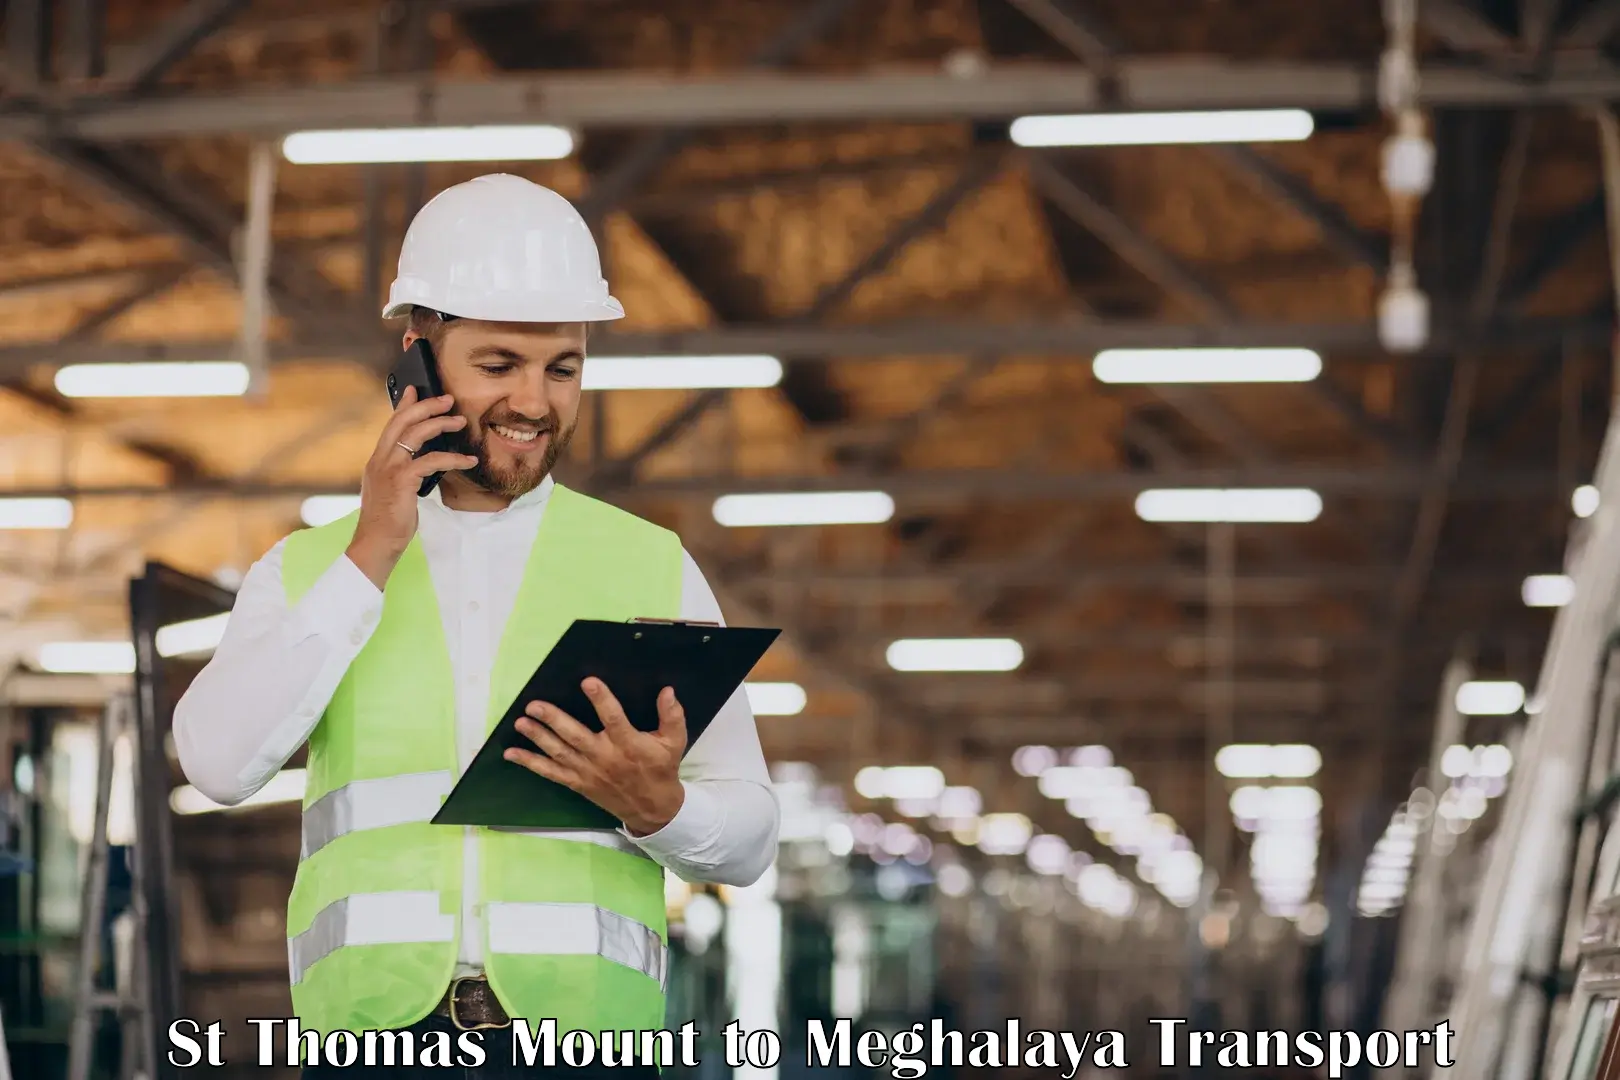 Delivery service St Thomas Mount to Meghalaya